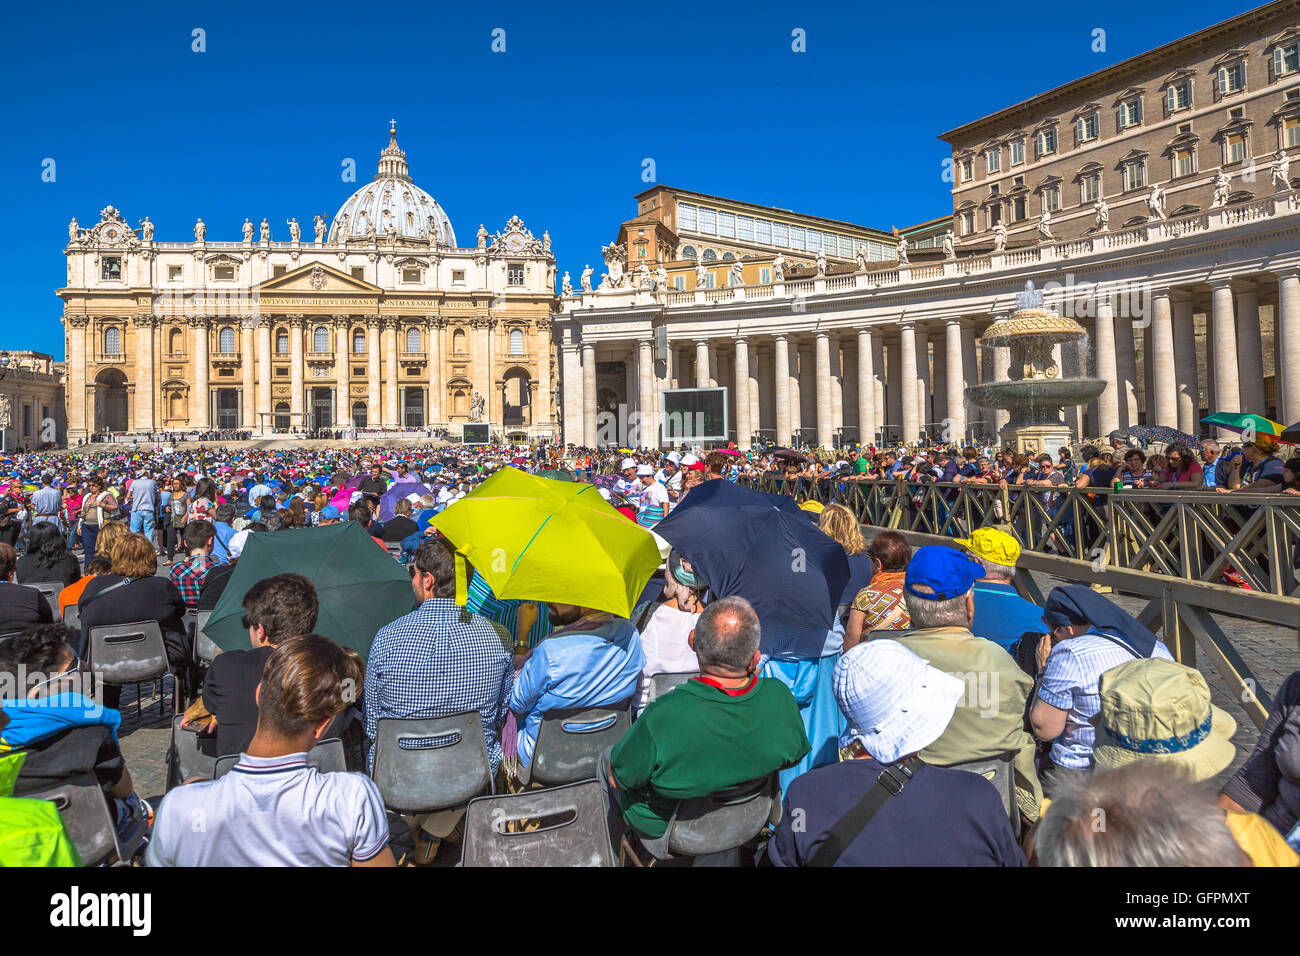 People in St. Peter's Basilica Stock Photo